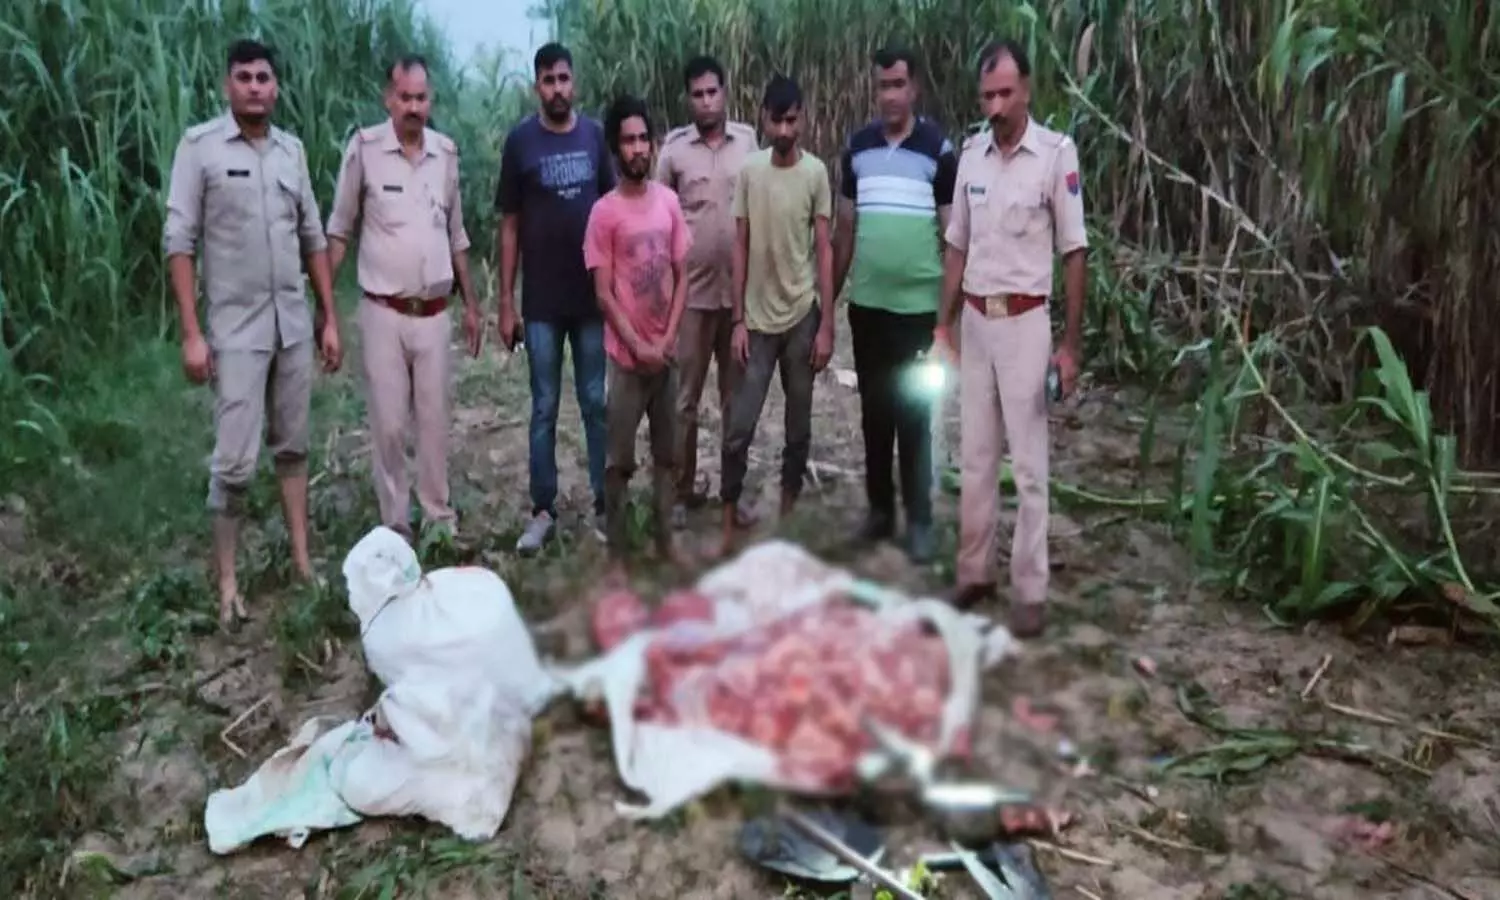 Incident of cow slaughter exposed in Hapur, huge amount of meat and harvesting material recovered from the spot